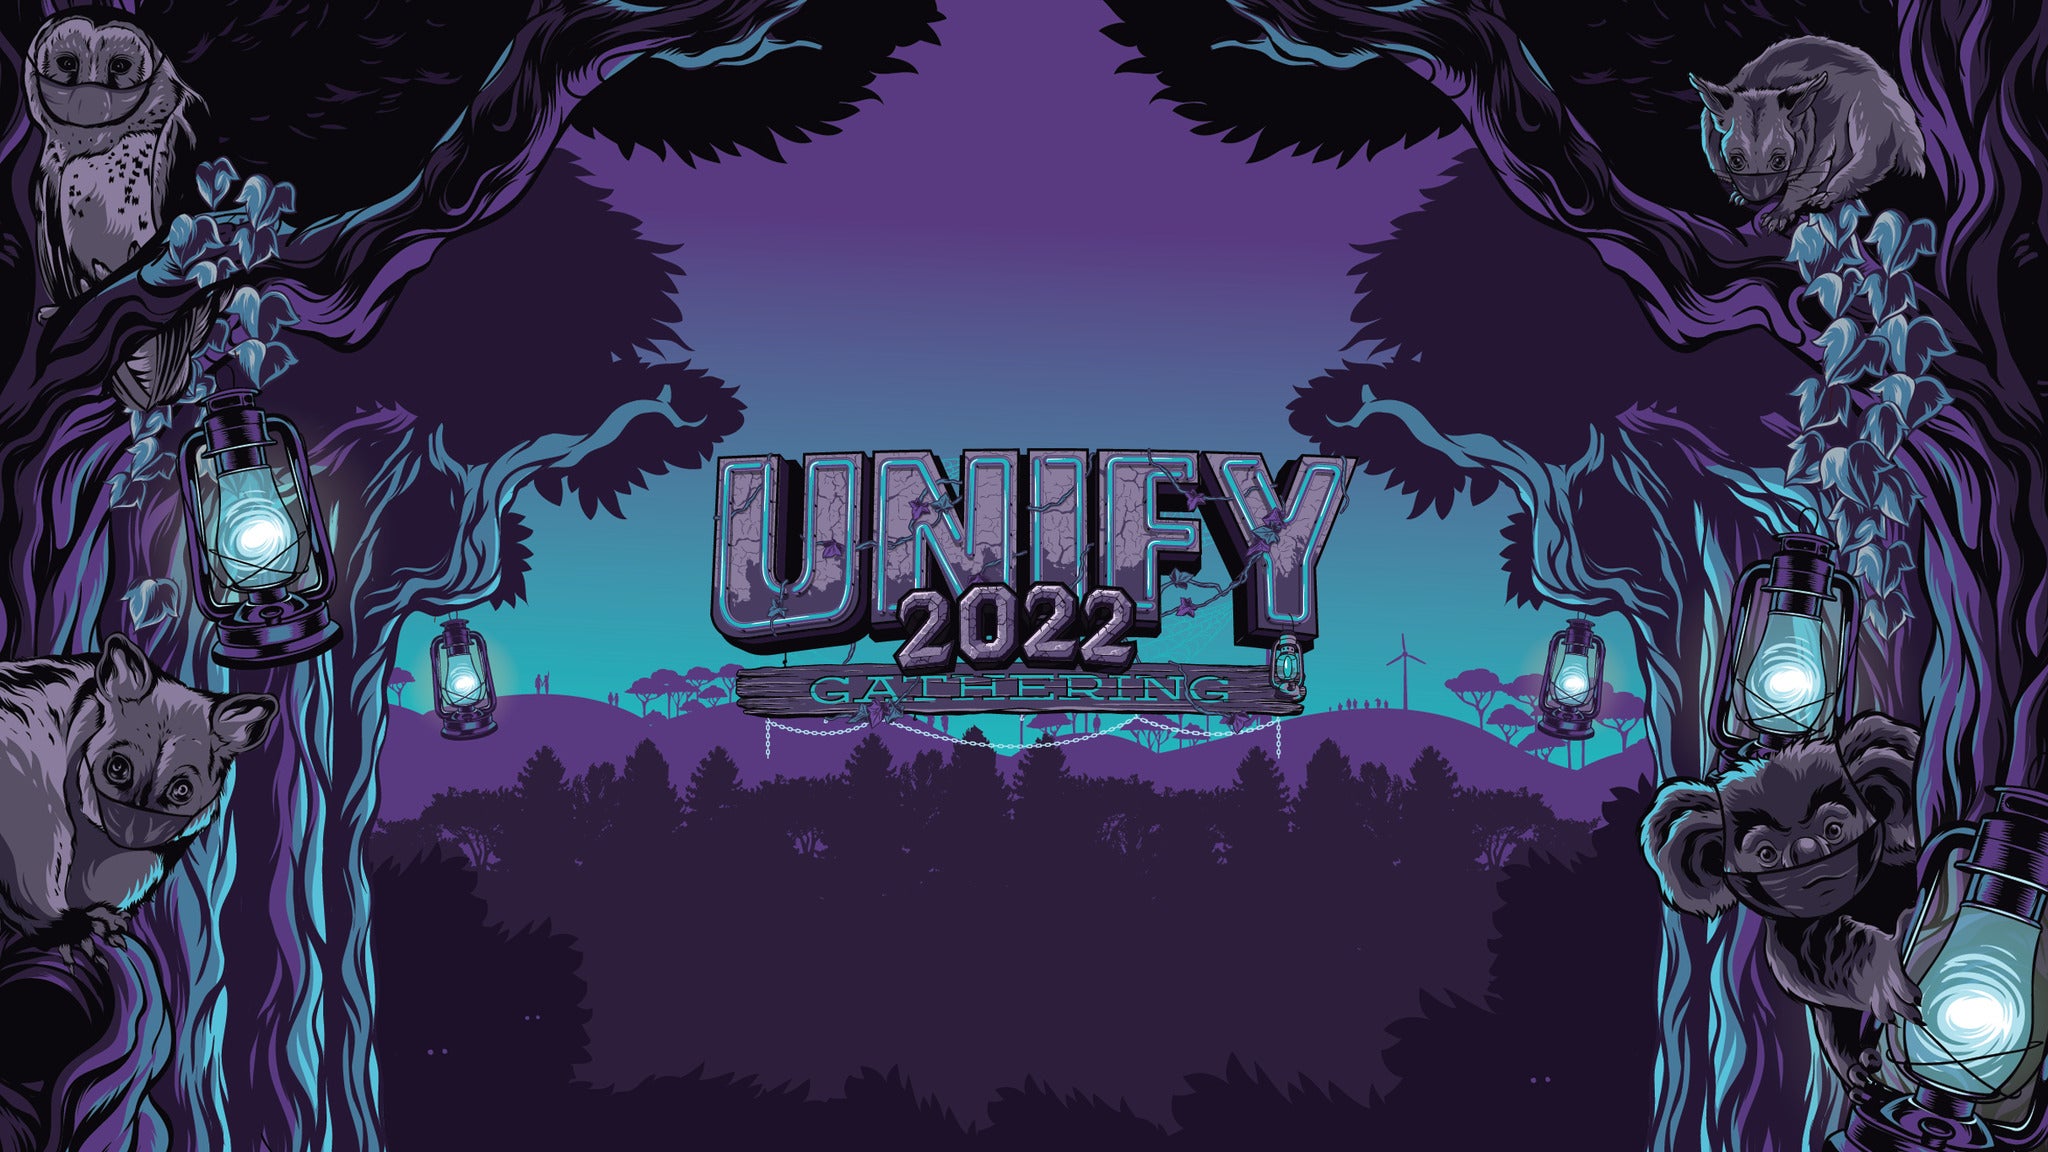 Image used with permission from Ticketmaster | UNIFY Gathering tickets